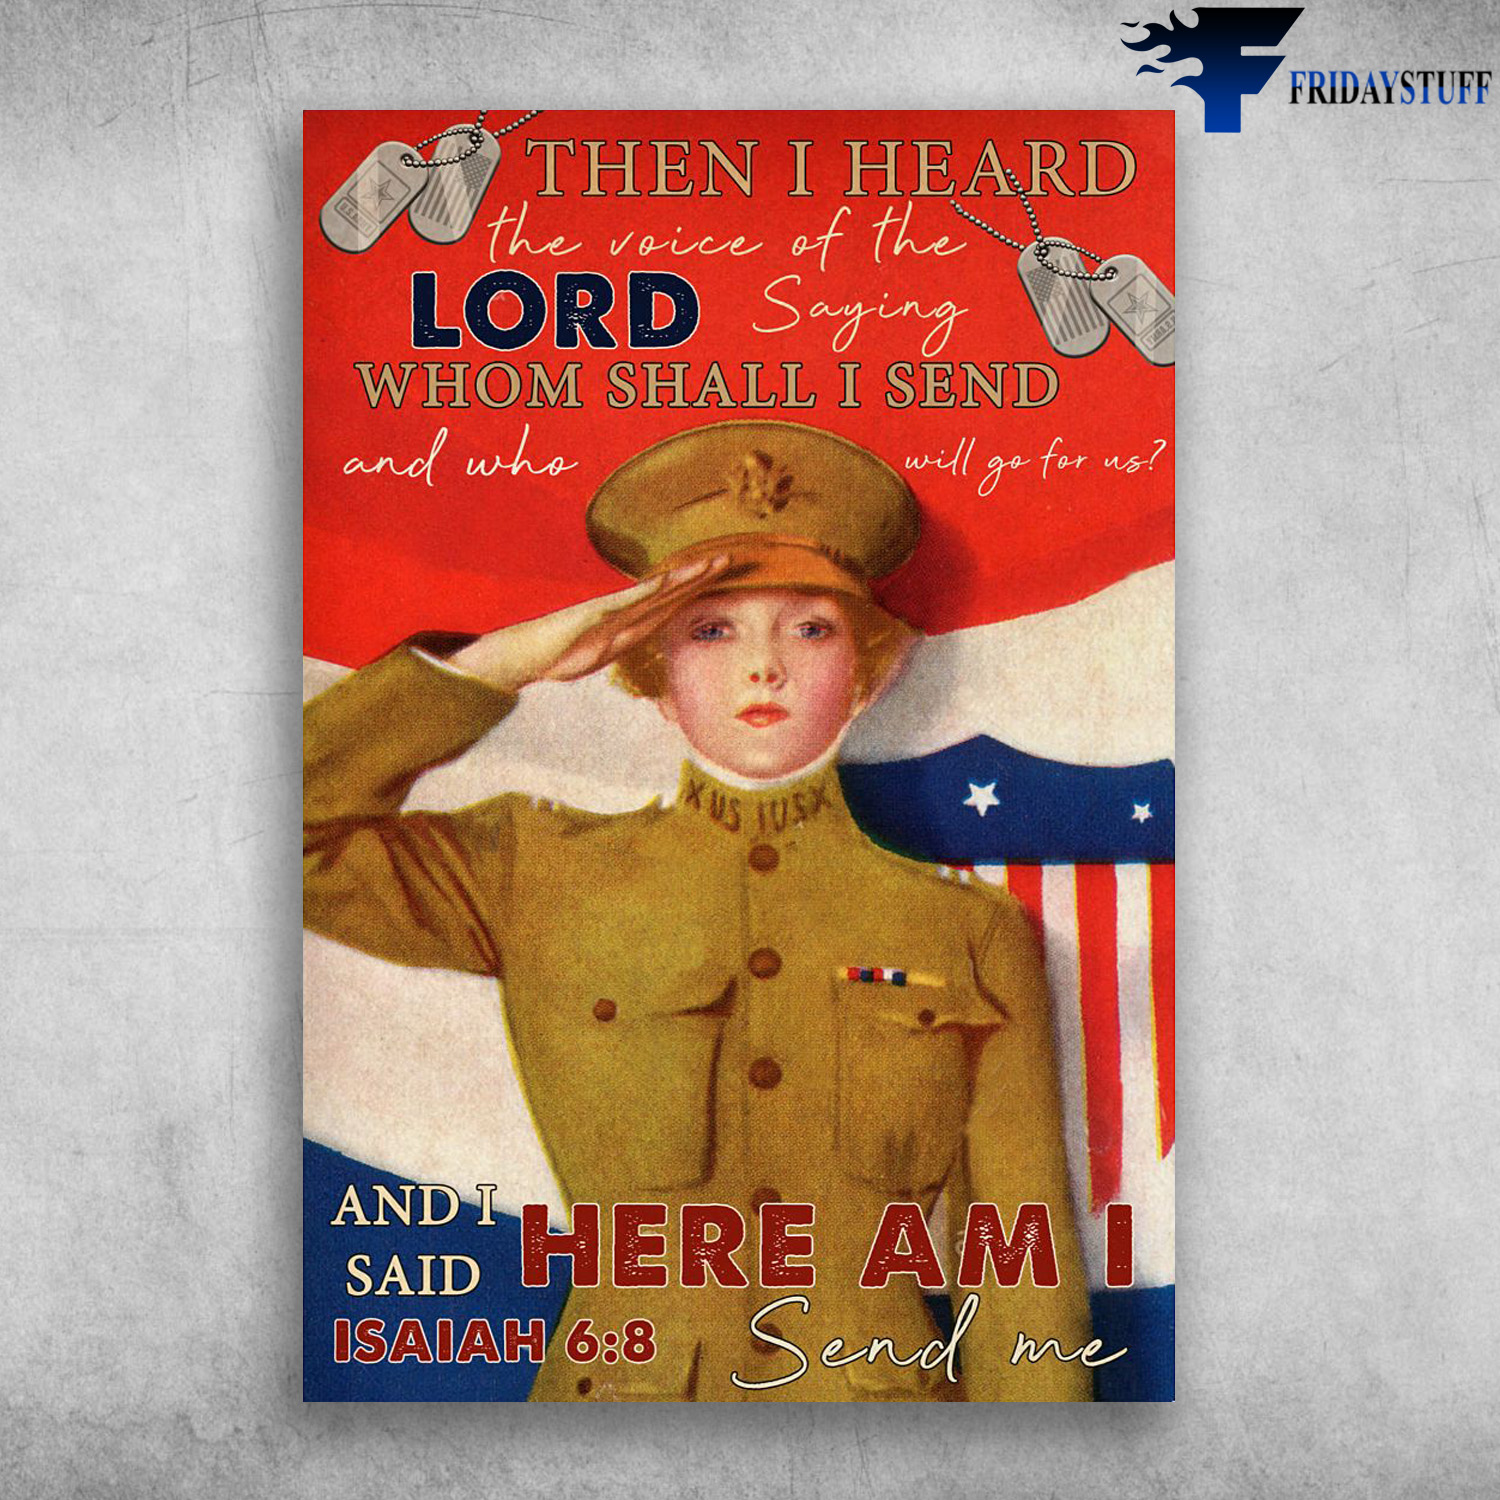 US Female Soldier Lord Send Me Vertical Poster - The I Heard The Voice Of The Lord, Saying Whom Shall I Send, And Who Will Go For Us, And I Said Here Am I Send Me